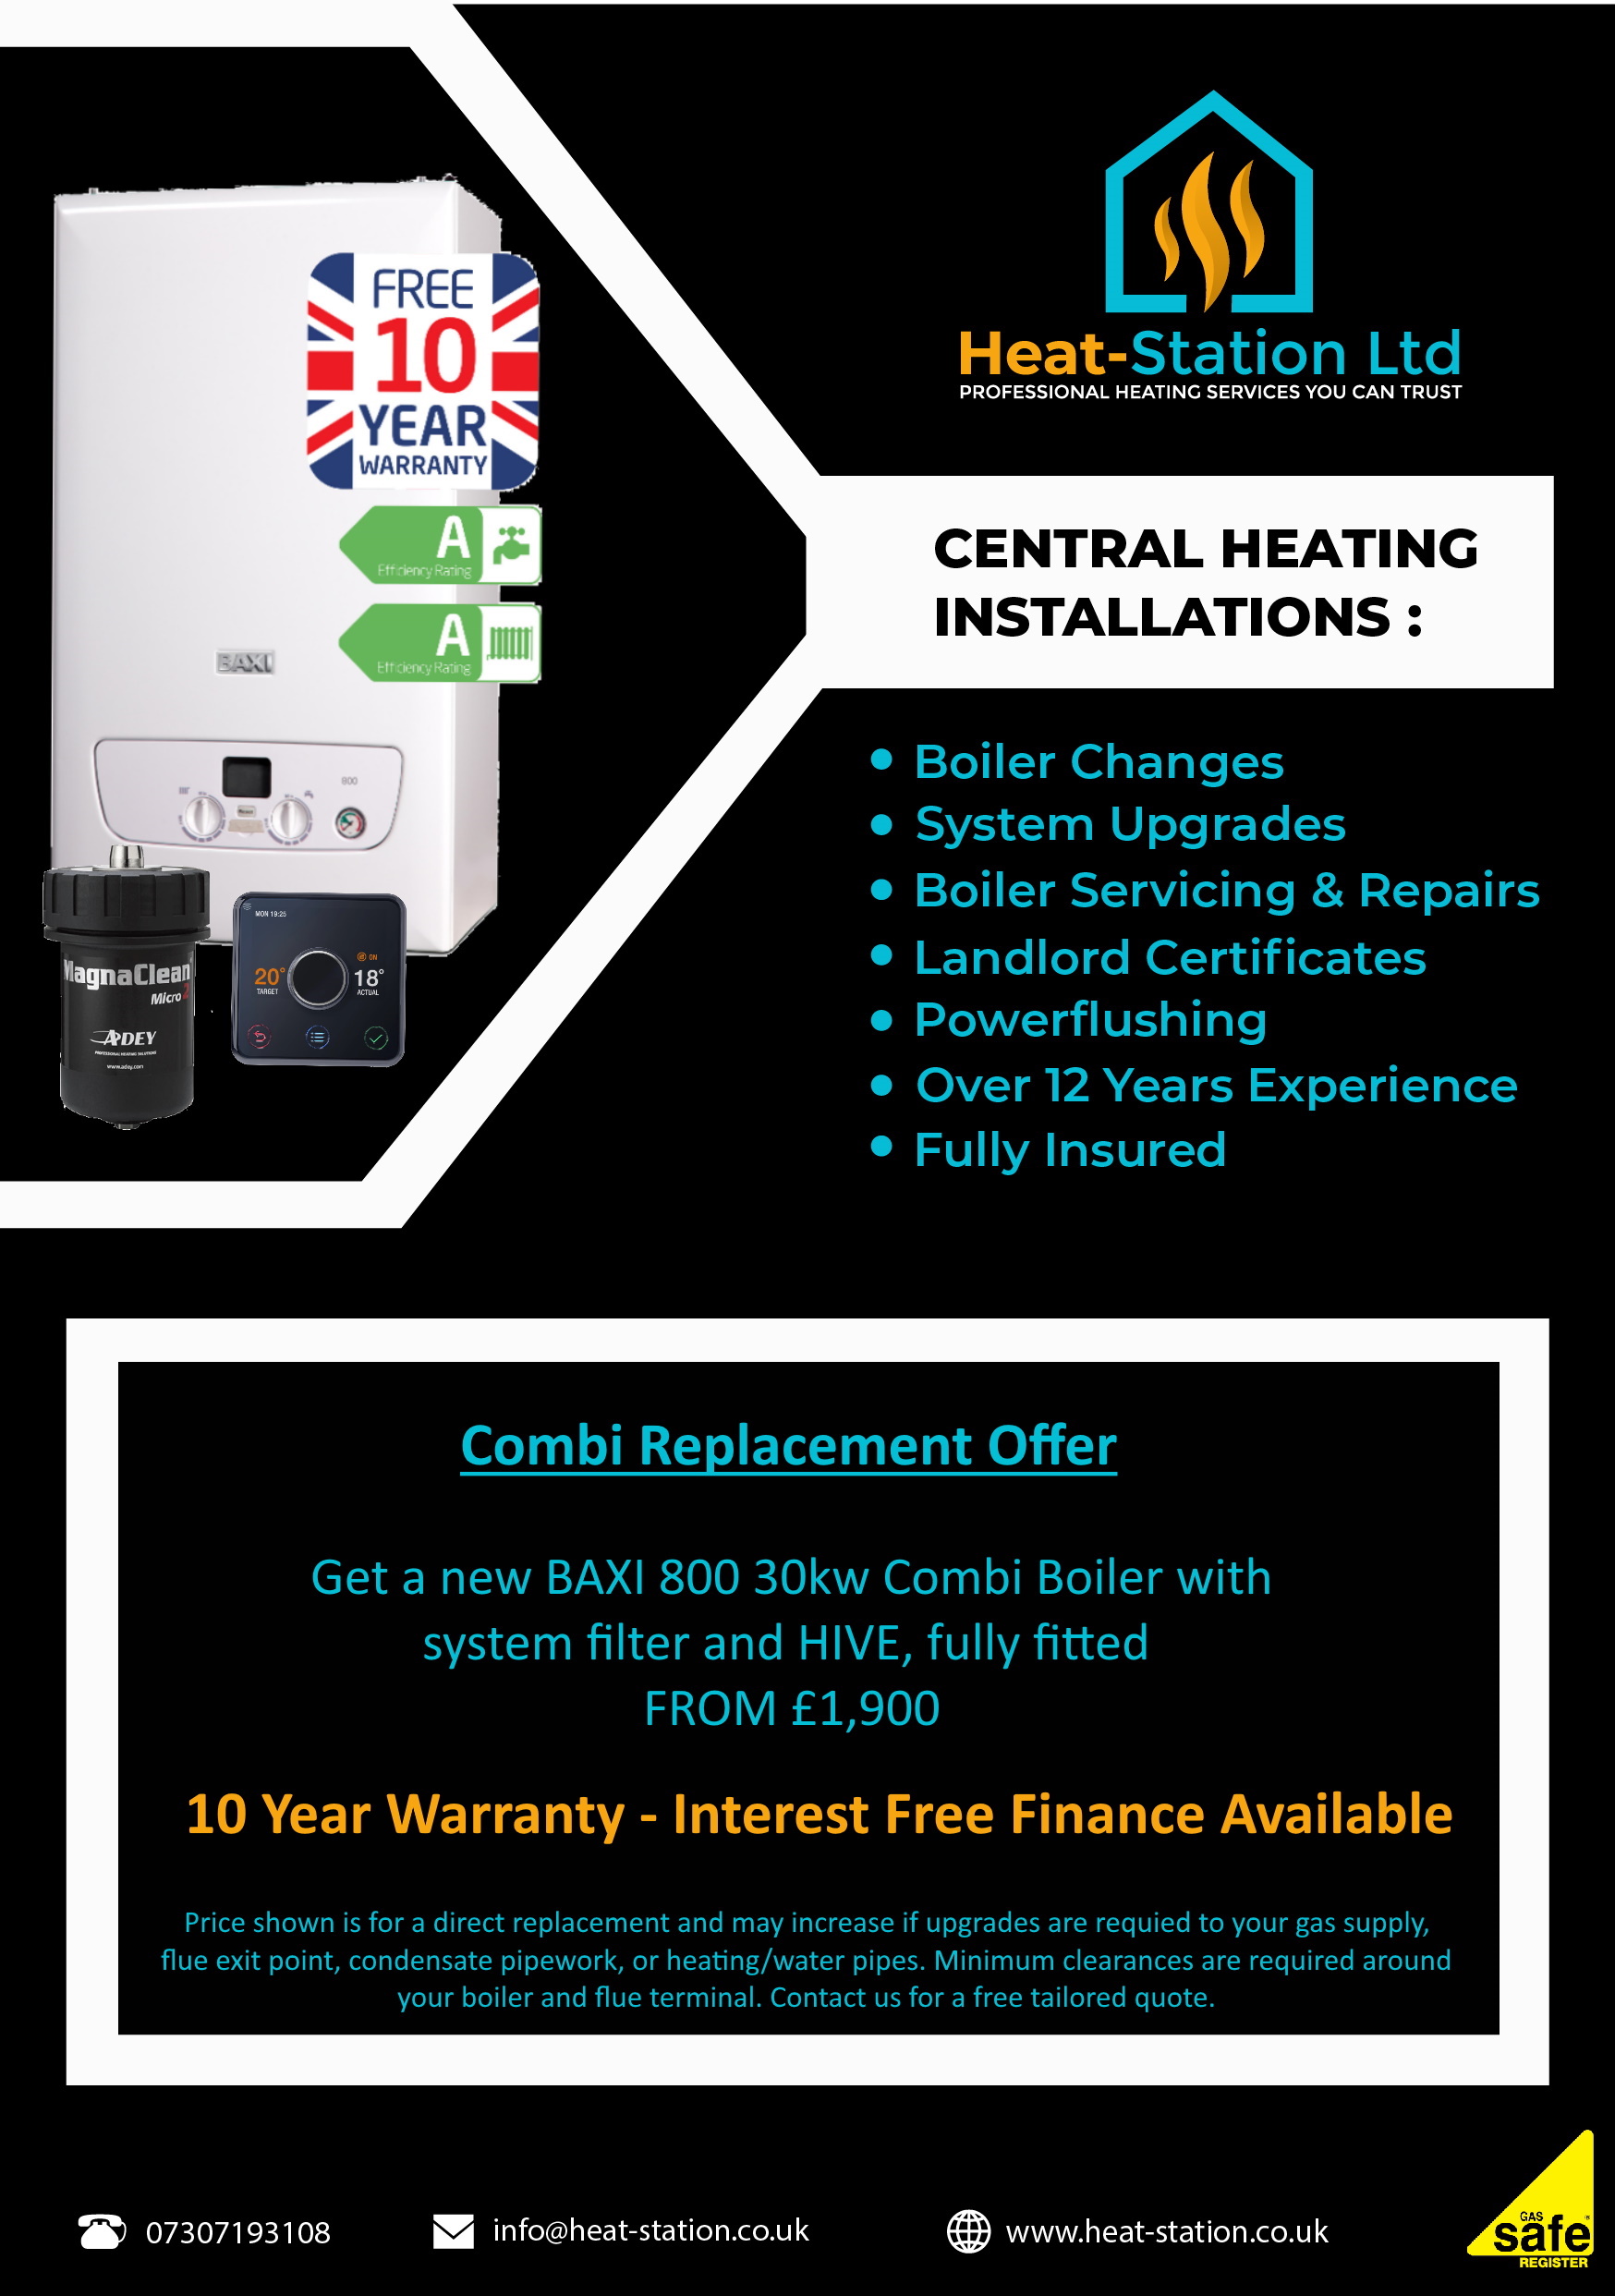 Baxi 800 Combi Replacement Offer